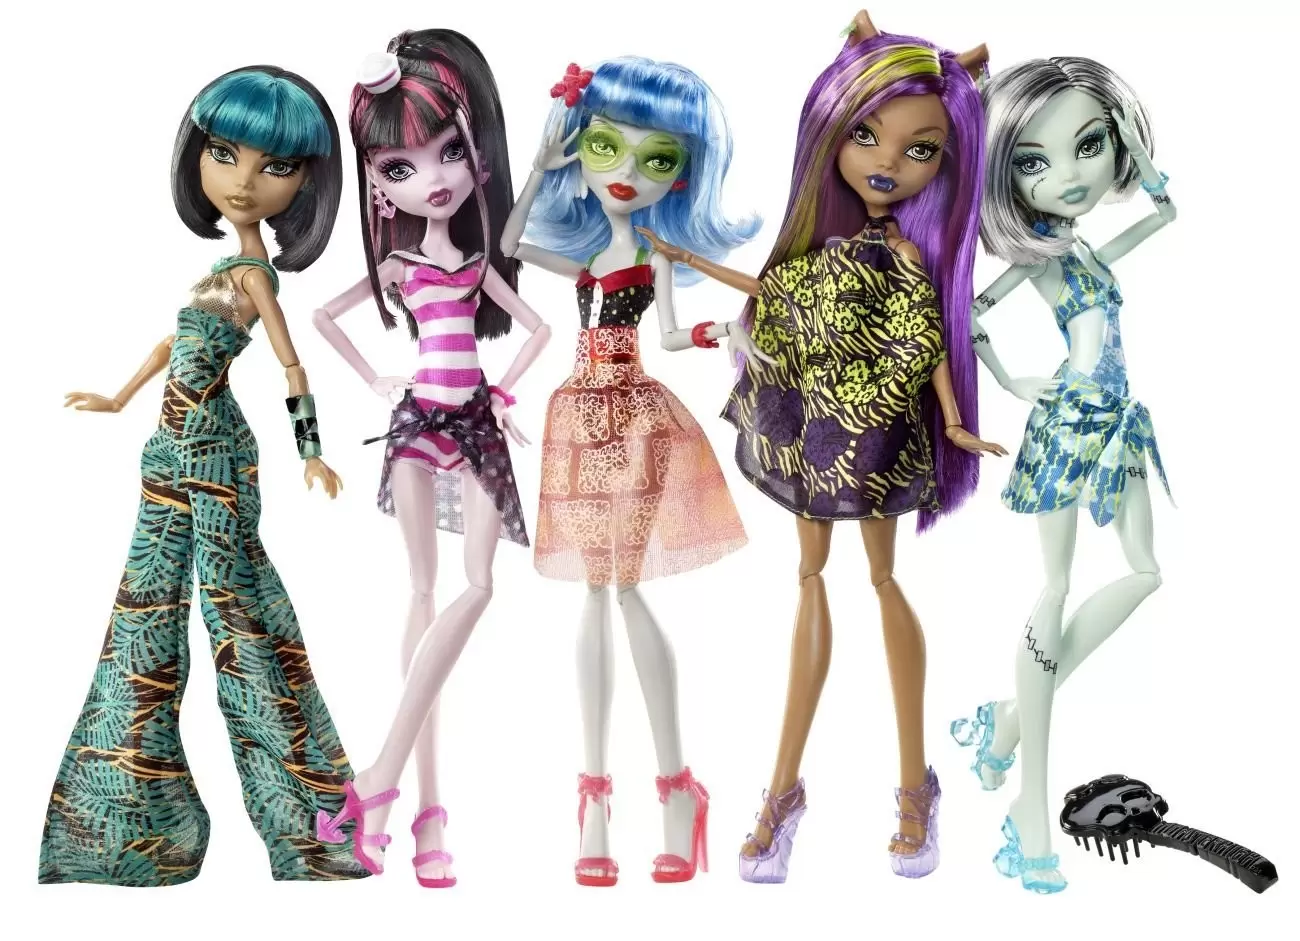 Monster High - Cleo, Draculaura, Ghoulia, Clawdeen & Frankie (5-pack) - Skull Shores